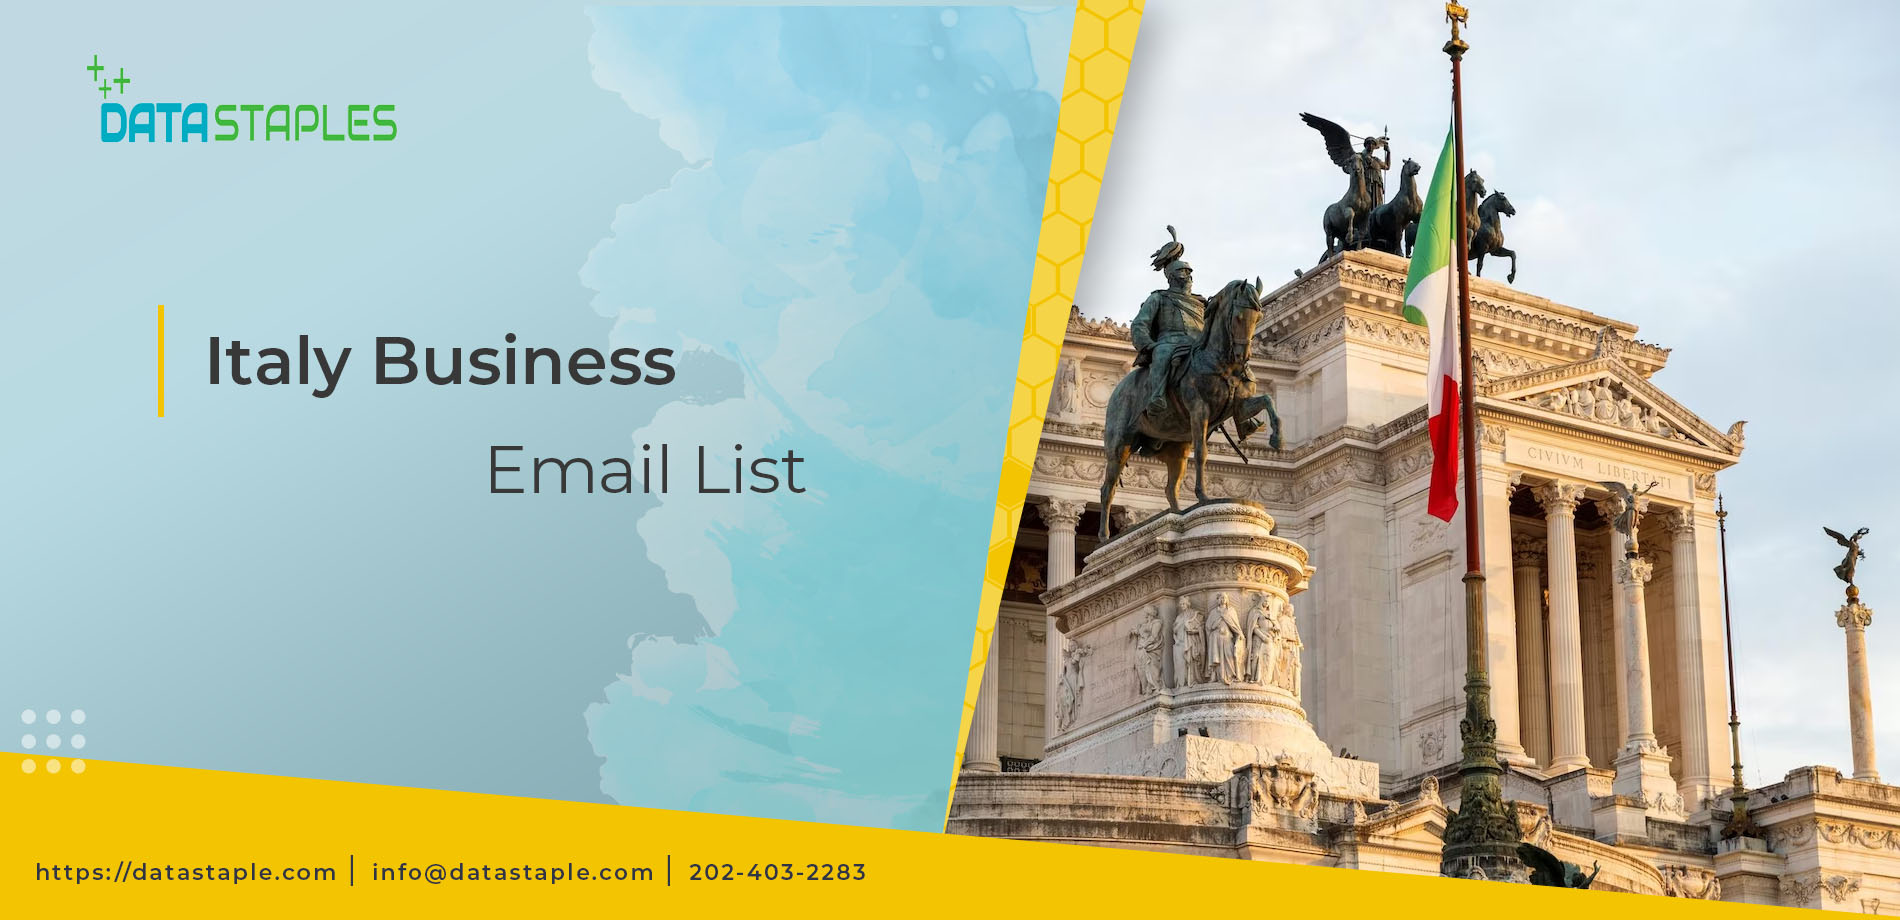 Italy Business Email List | DataStaples